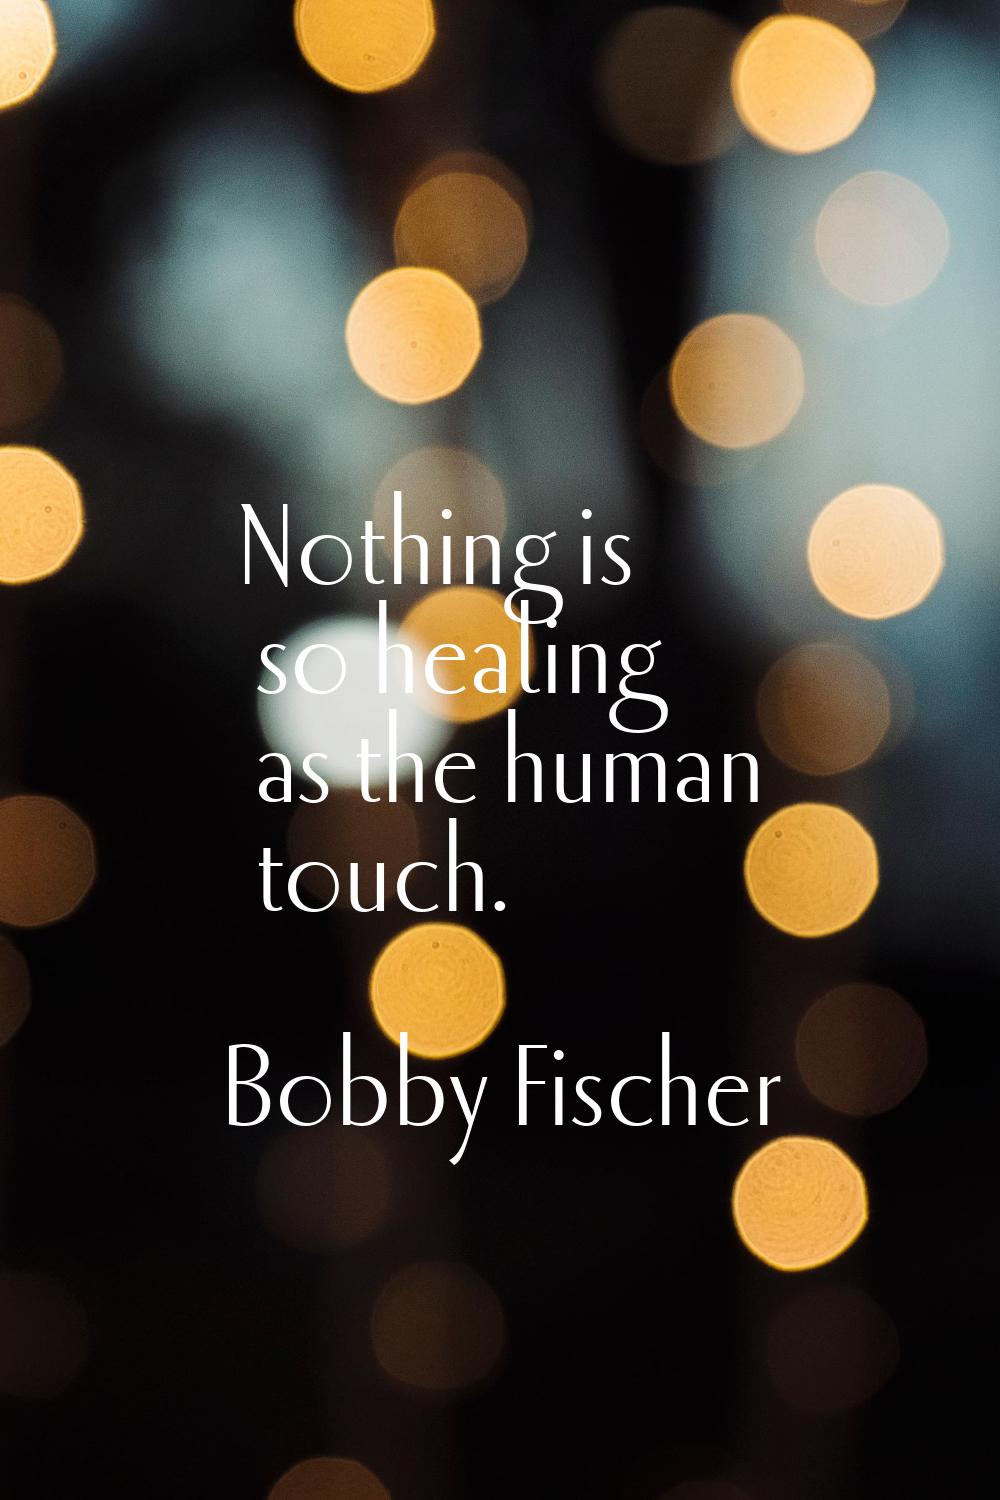 Nothing is so healing as the human touch.